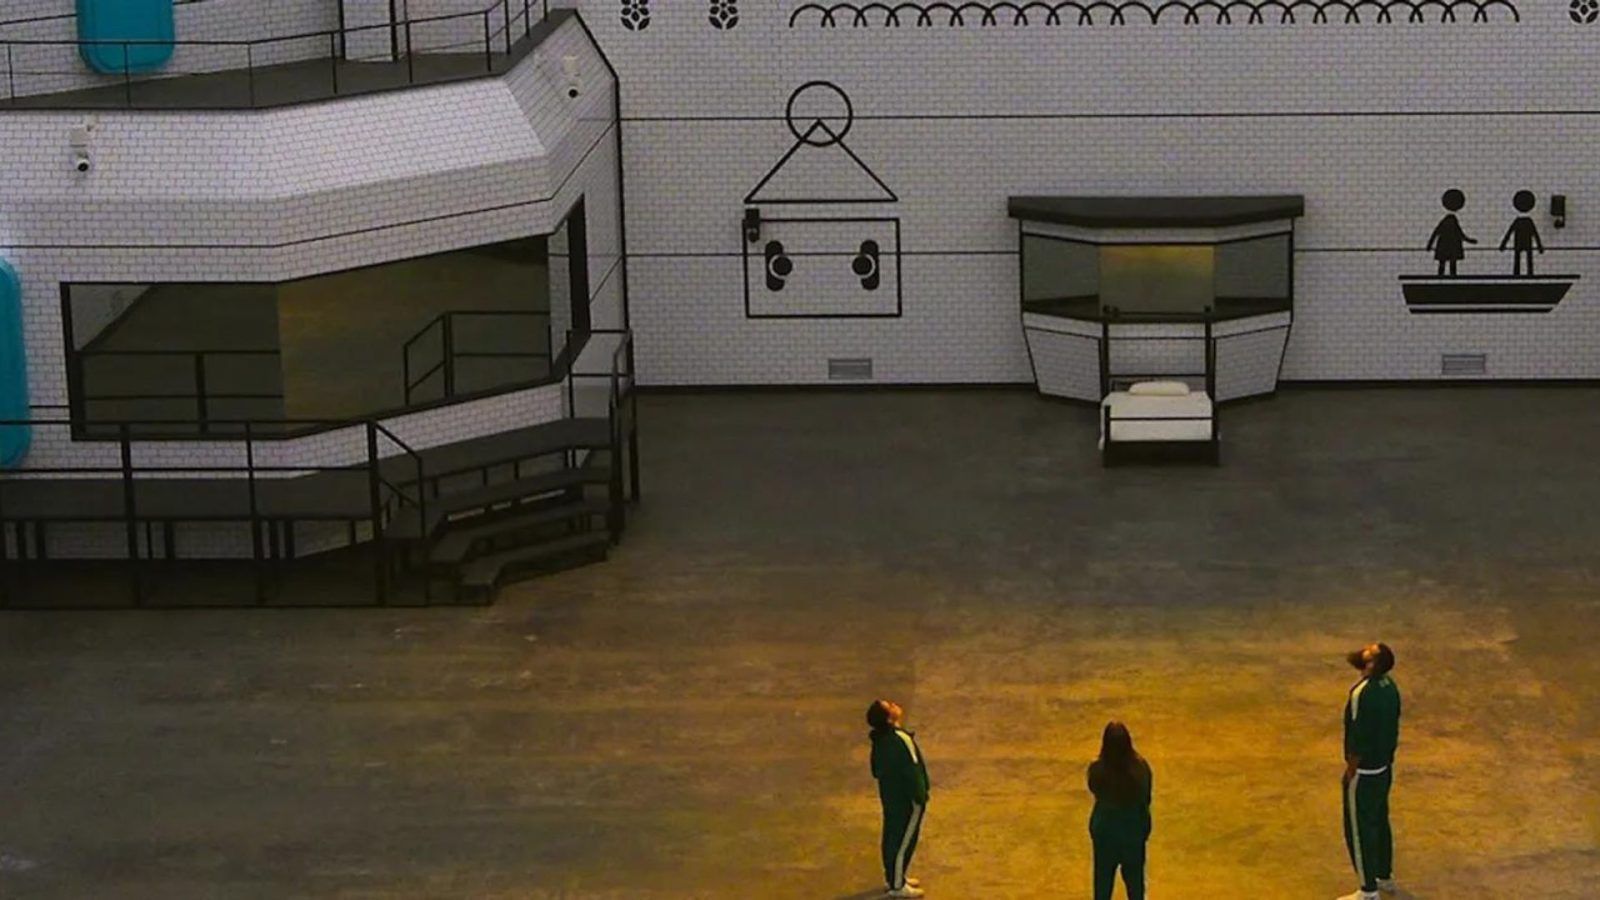 Squid Game: The Challenge' turns dystopian drama into real-life